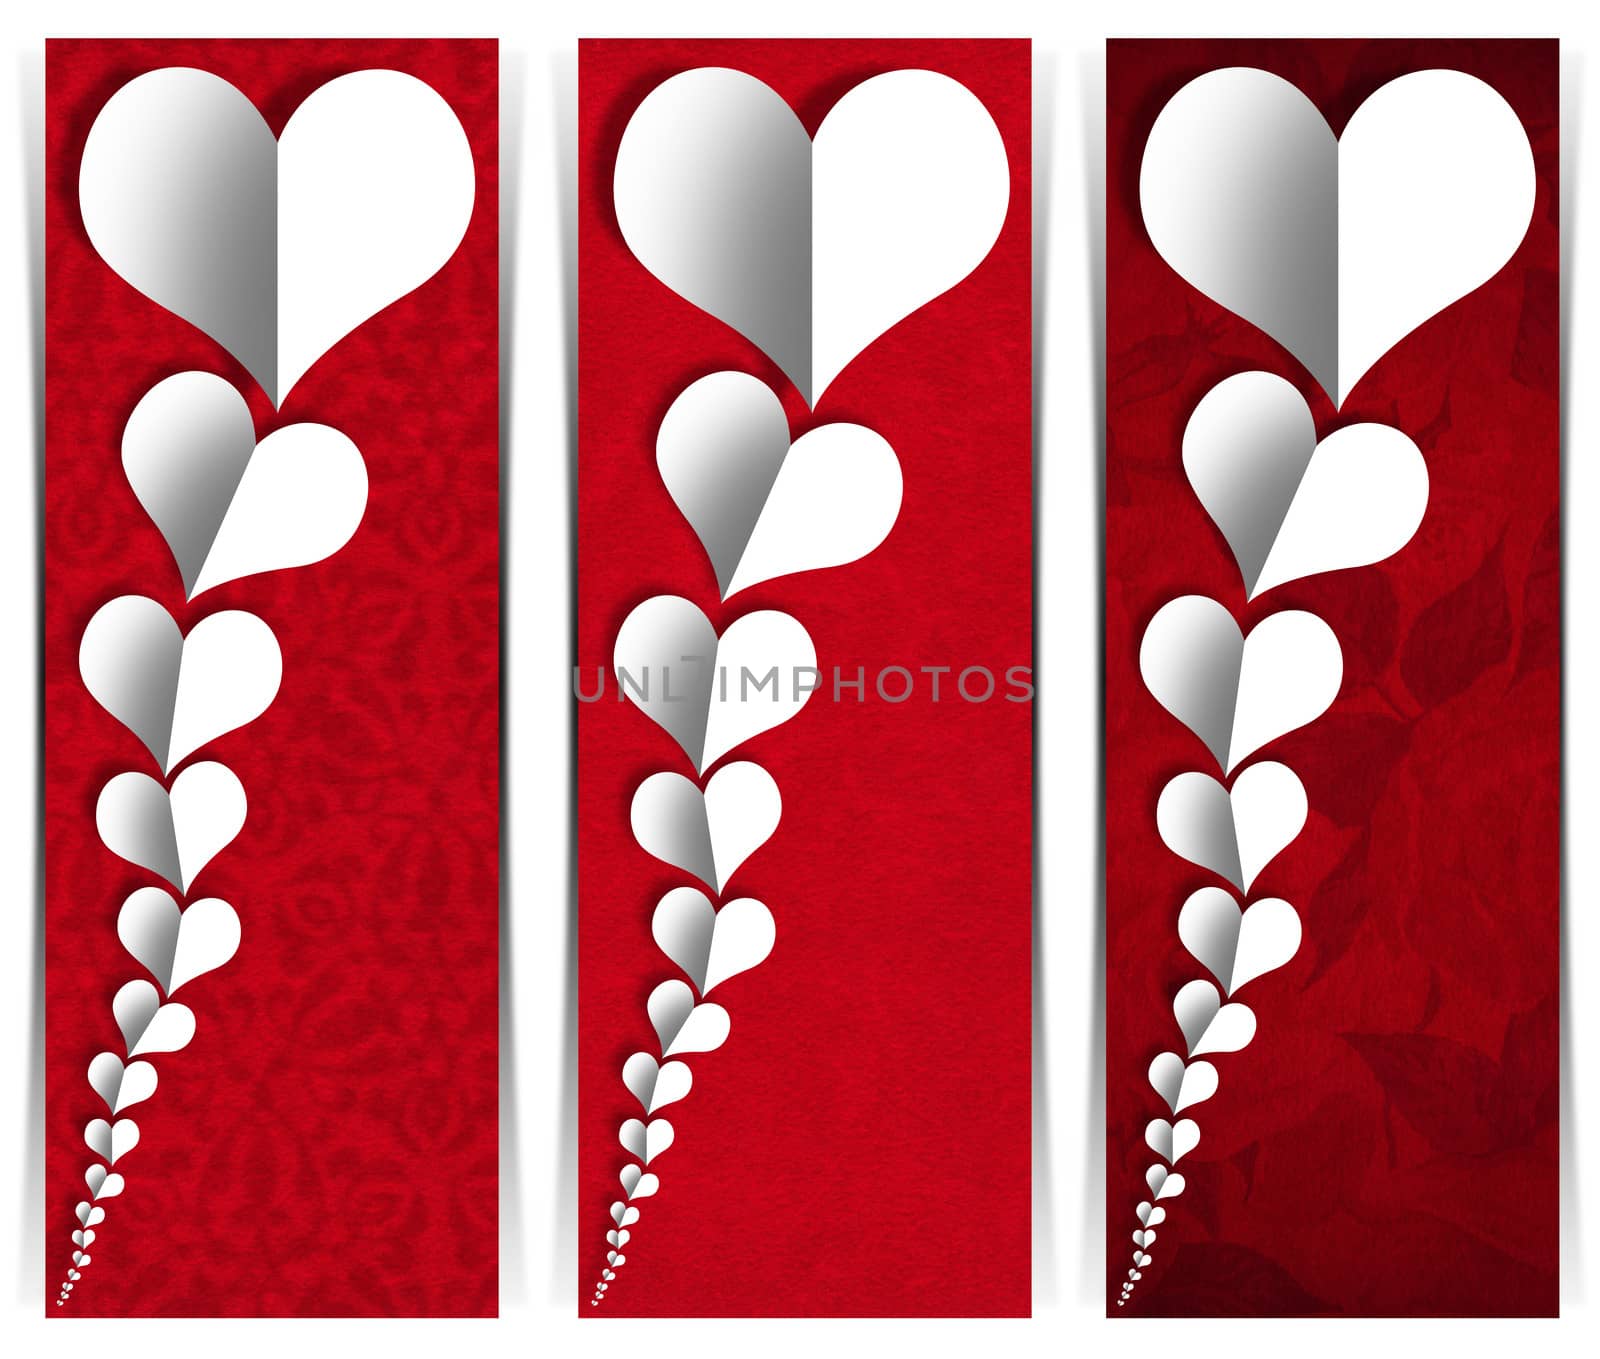 White Paper Hearts - Three Banners by catalby